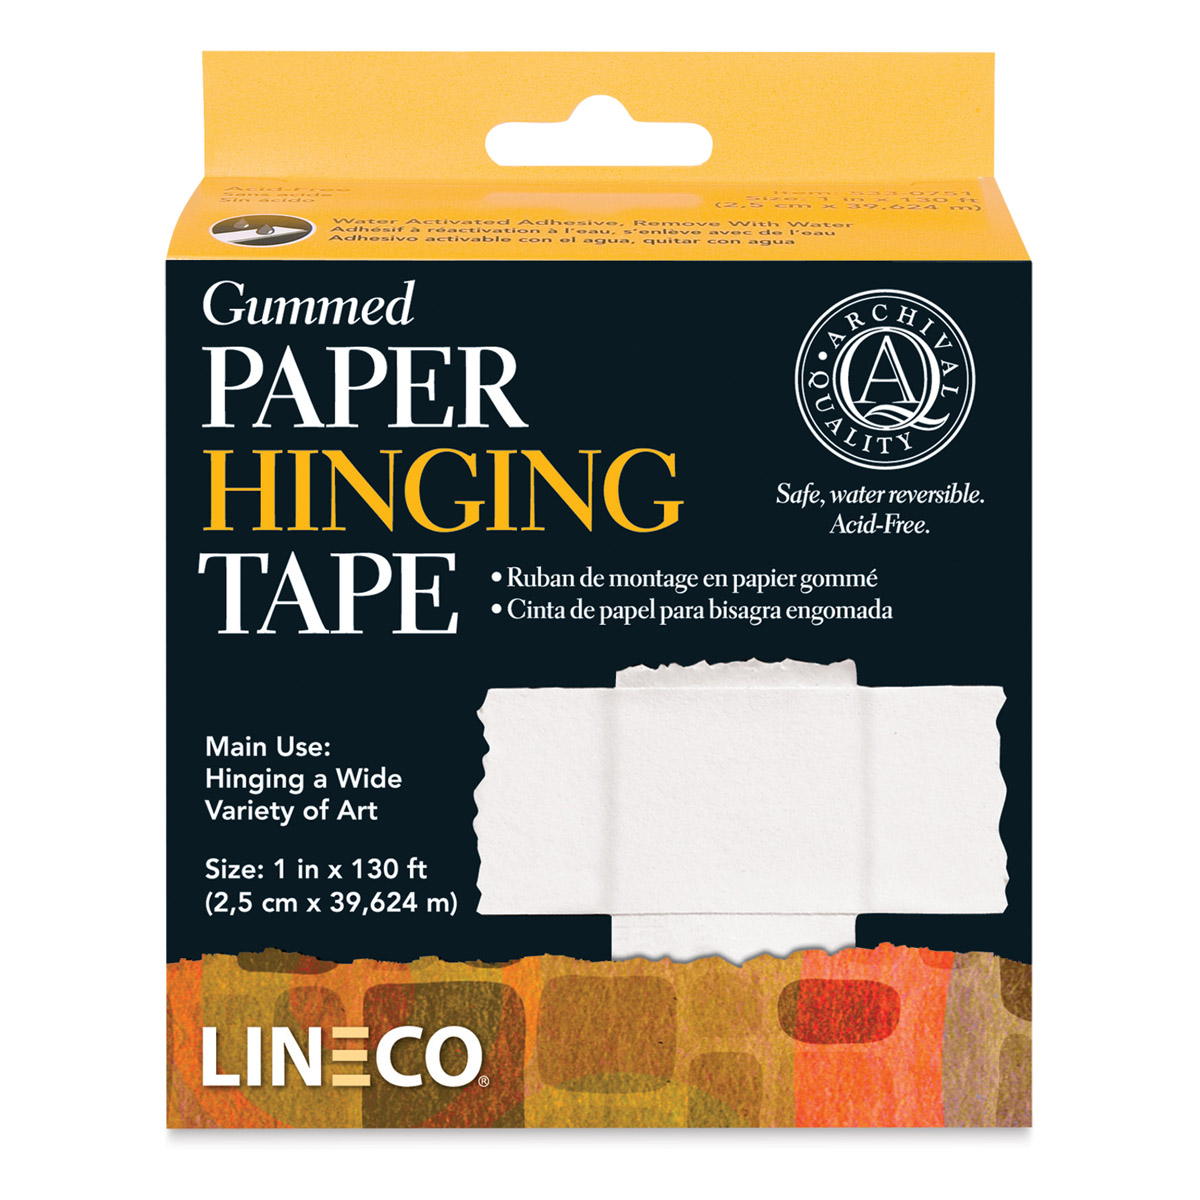 Archival Tape Remover & Tips